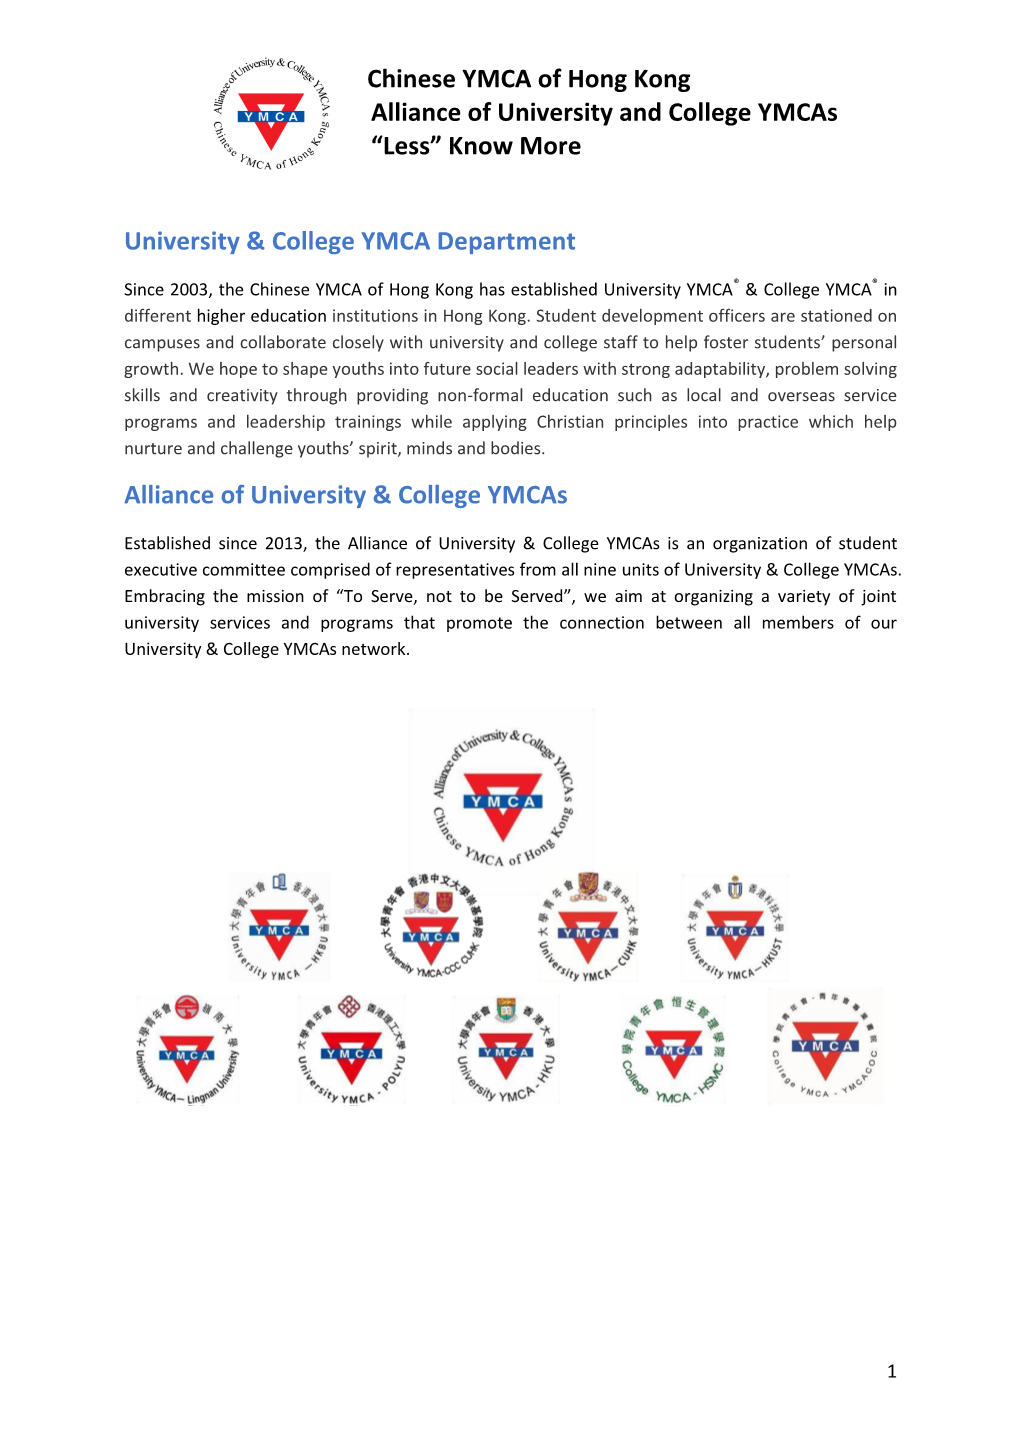 Chinese YMCA of Hong Kong Alliance of University and College Ymcas “Less” Know More